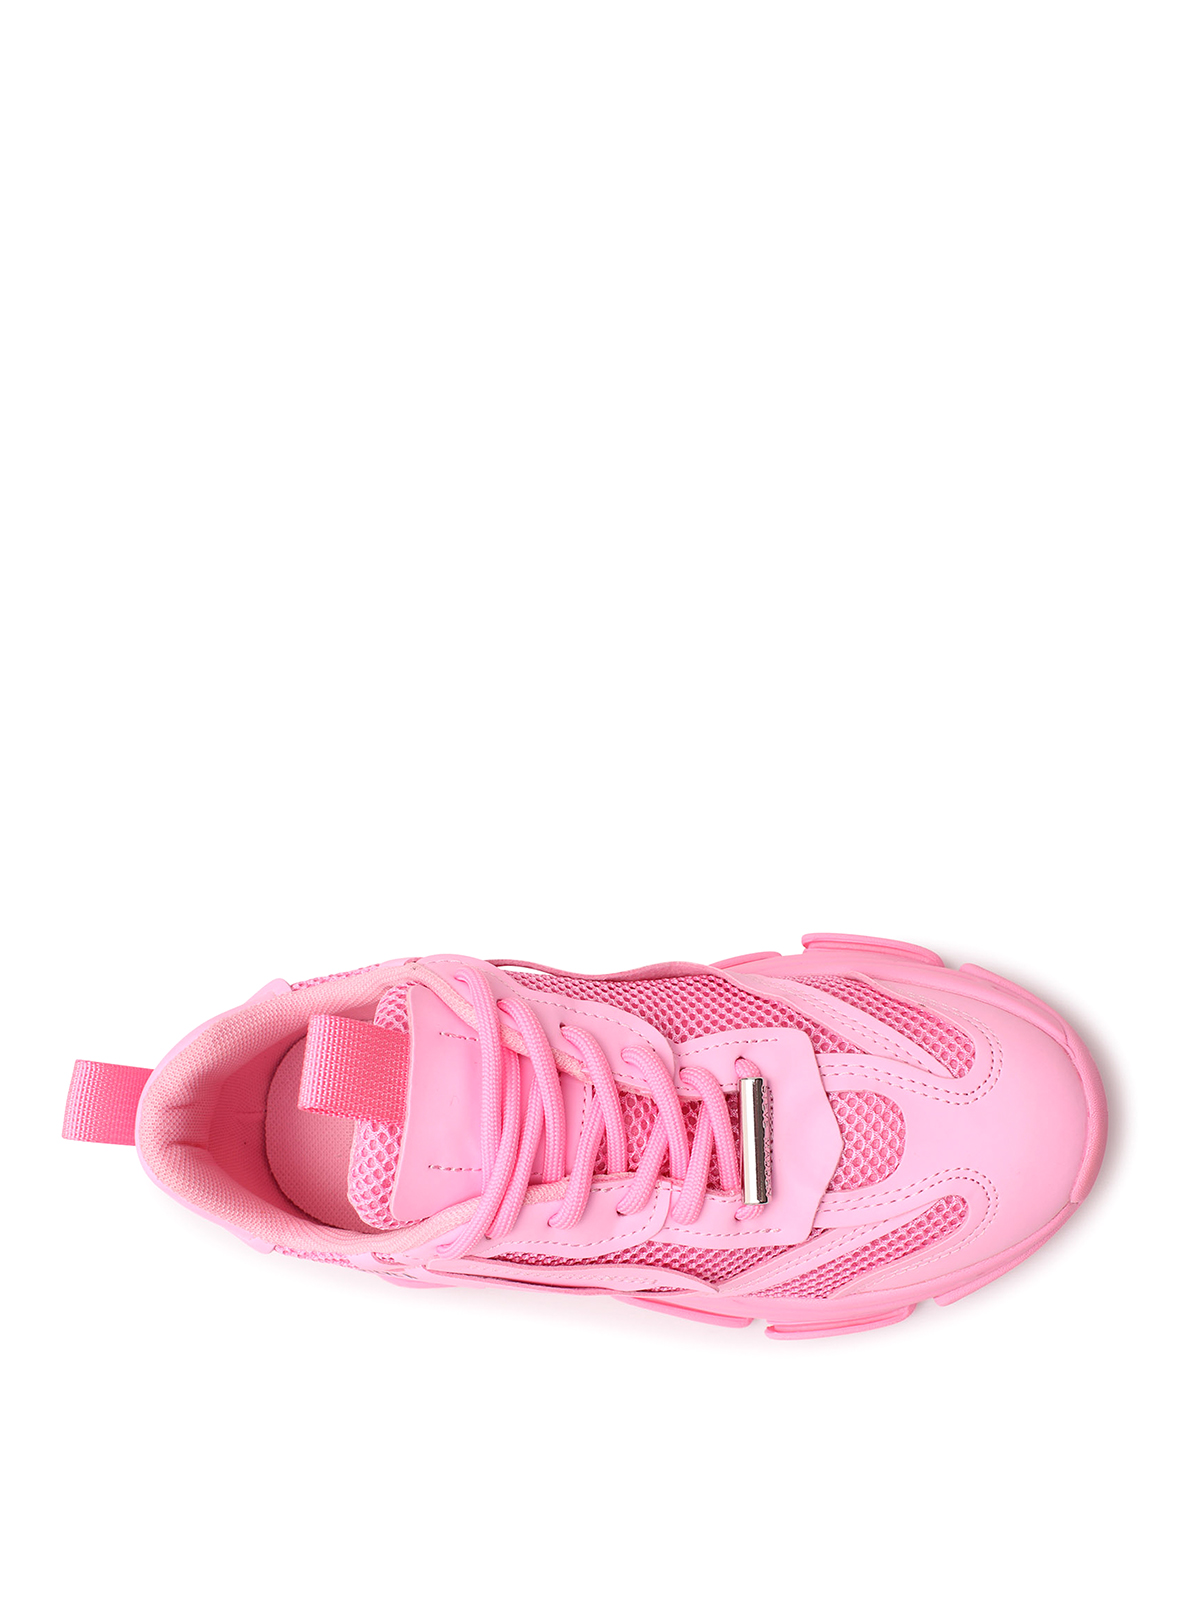 Shop Steve Madden Possession Pink Trainers